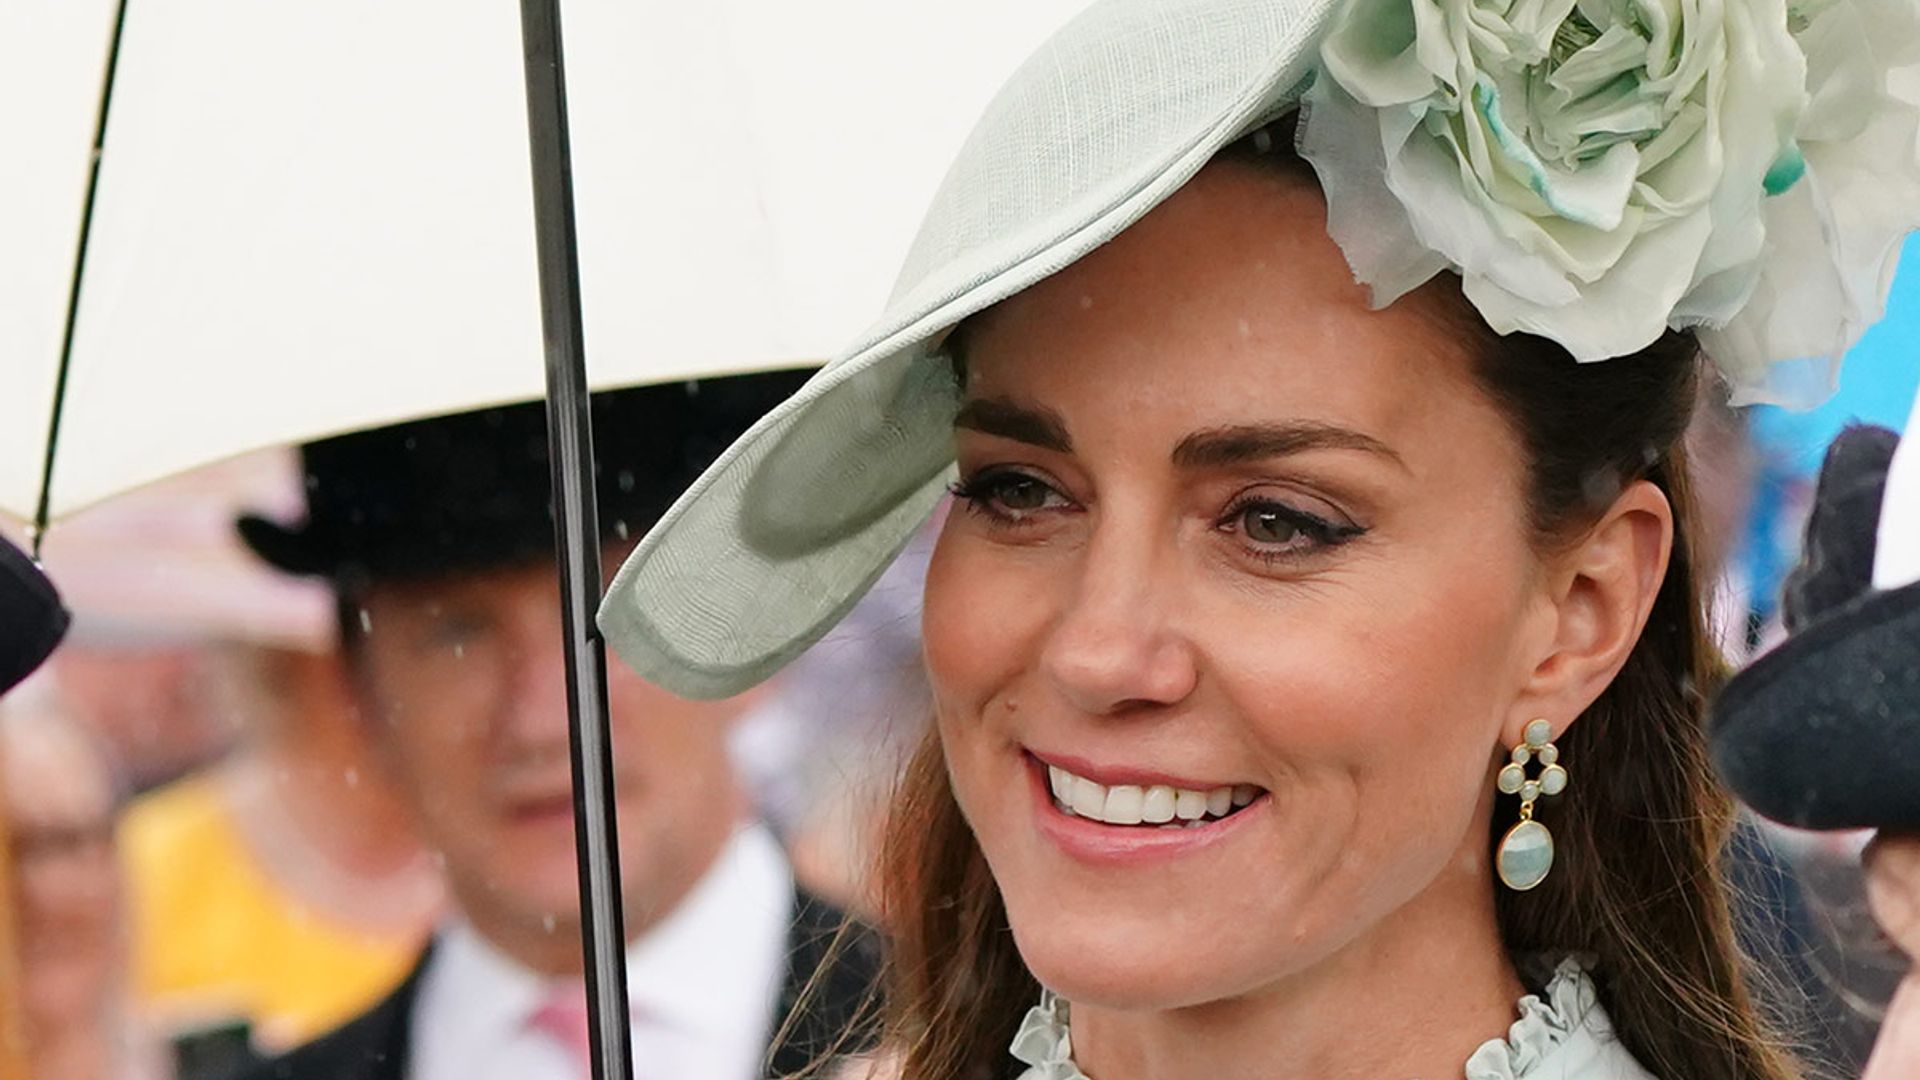 Duchess Kate 'so happy' as she bumps into friend at Buckingham Palace Garden Party